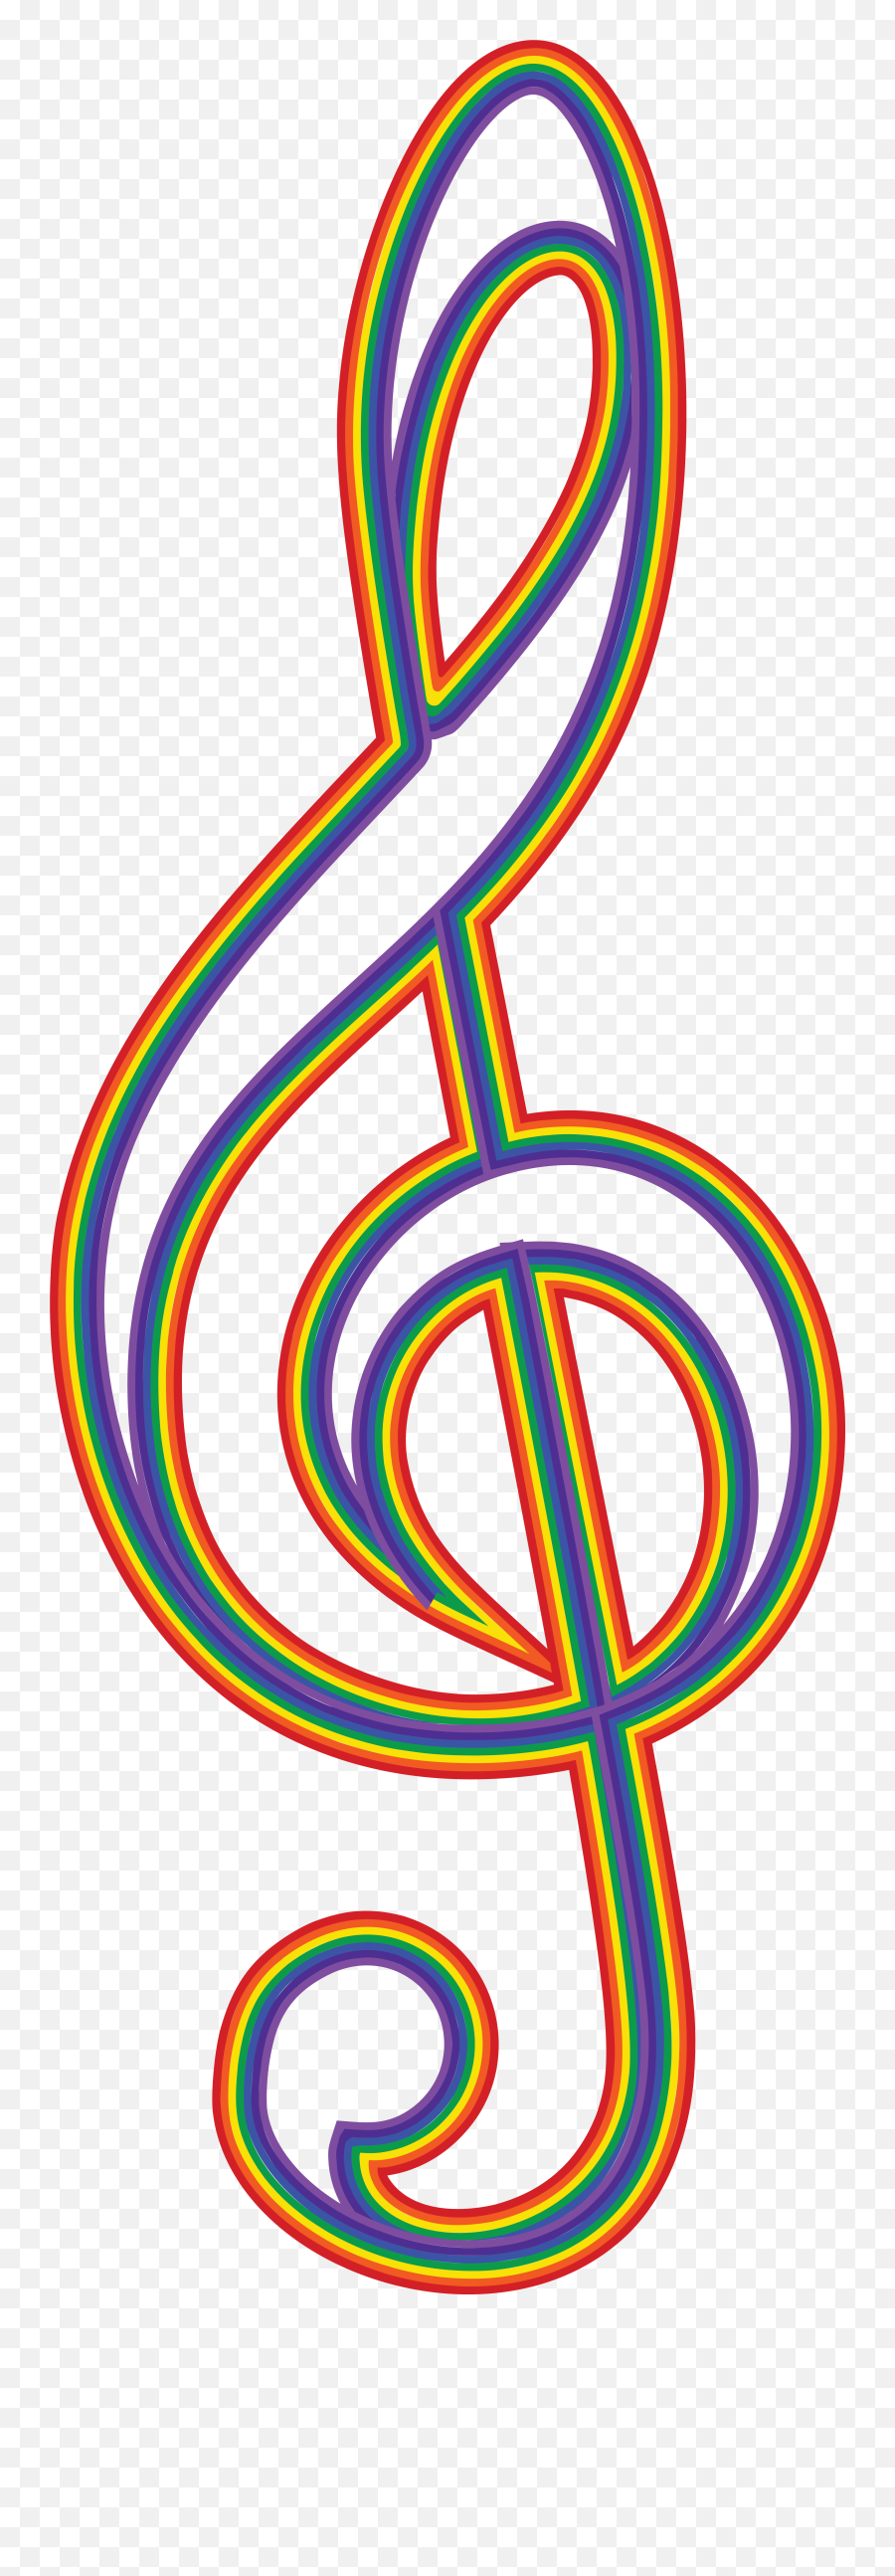 Free Clipart Of A Rainbow Music Clef - Clip Art Png Clef Emoji,Free Rainbow Clipart